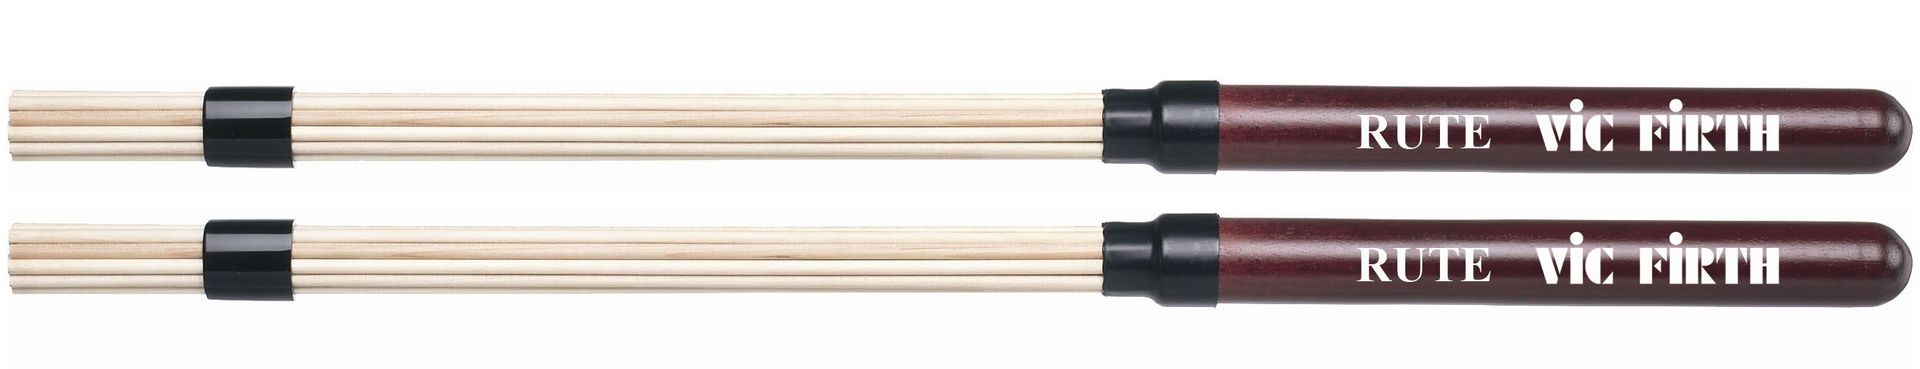 Vic Firth VF RUTE Rods